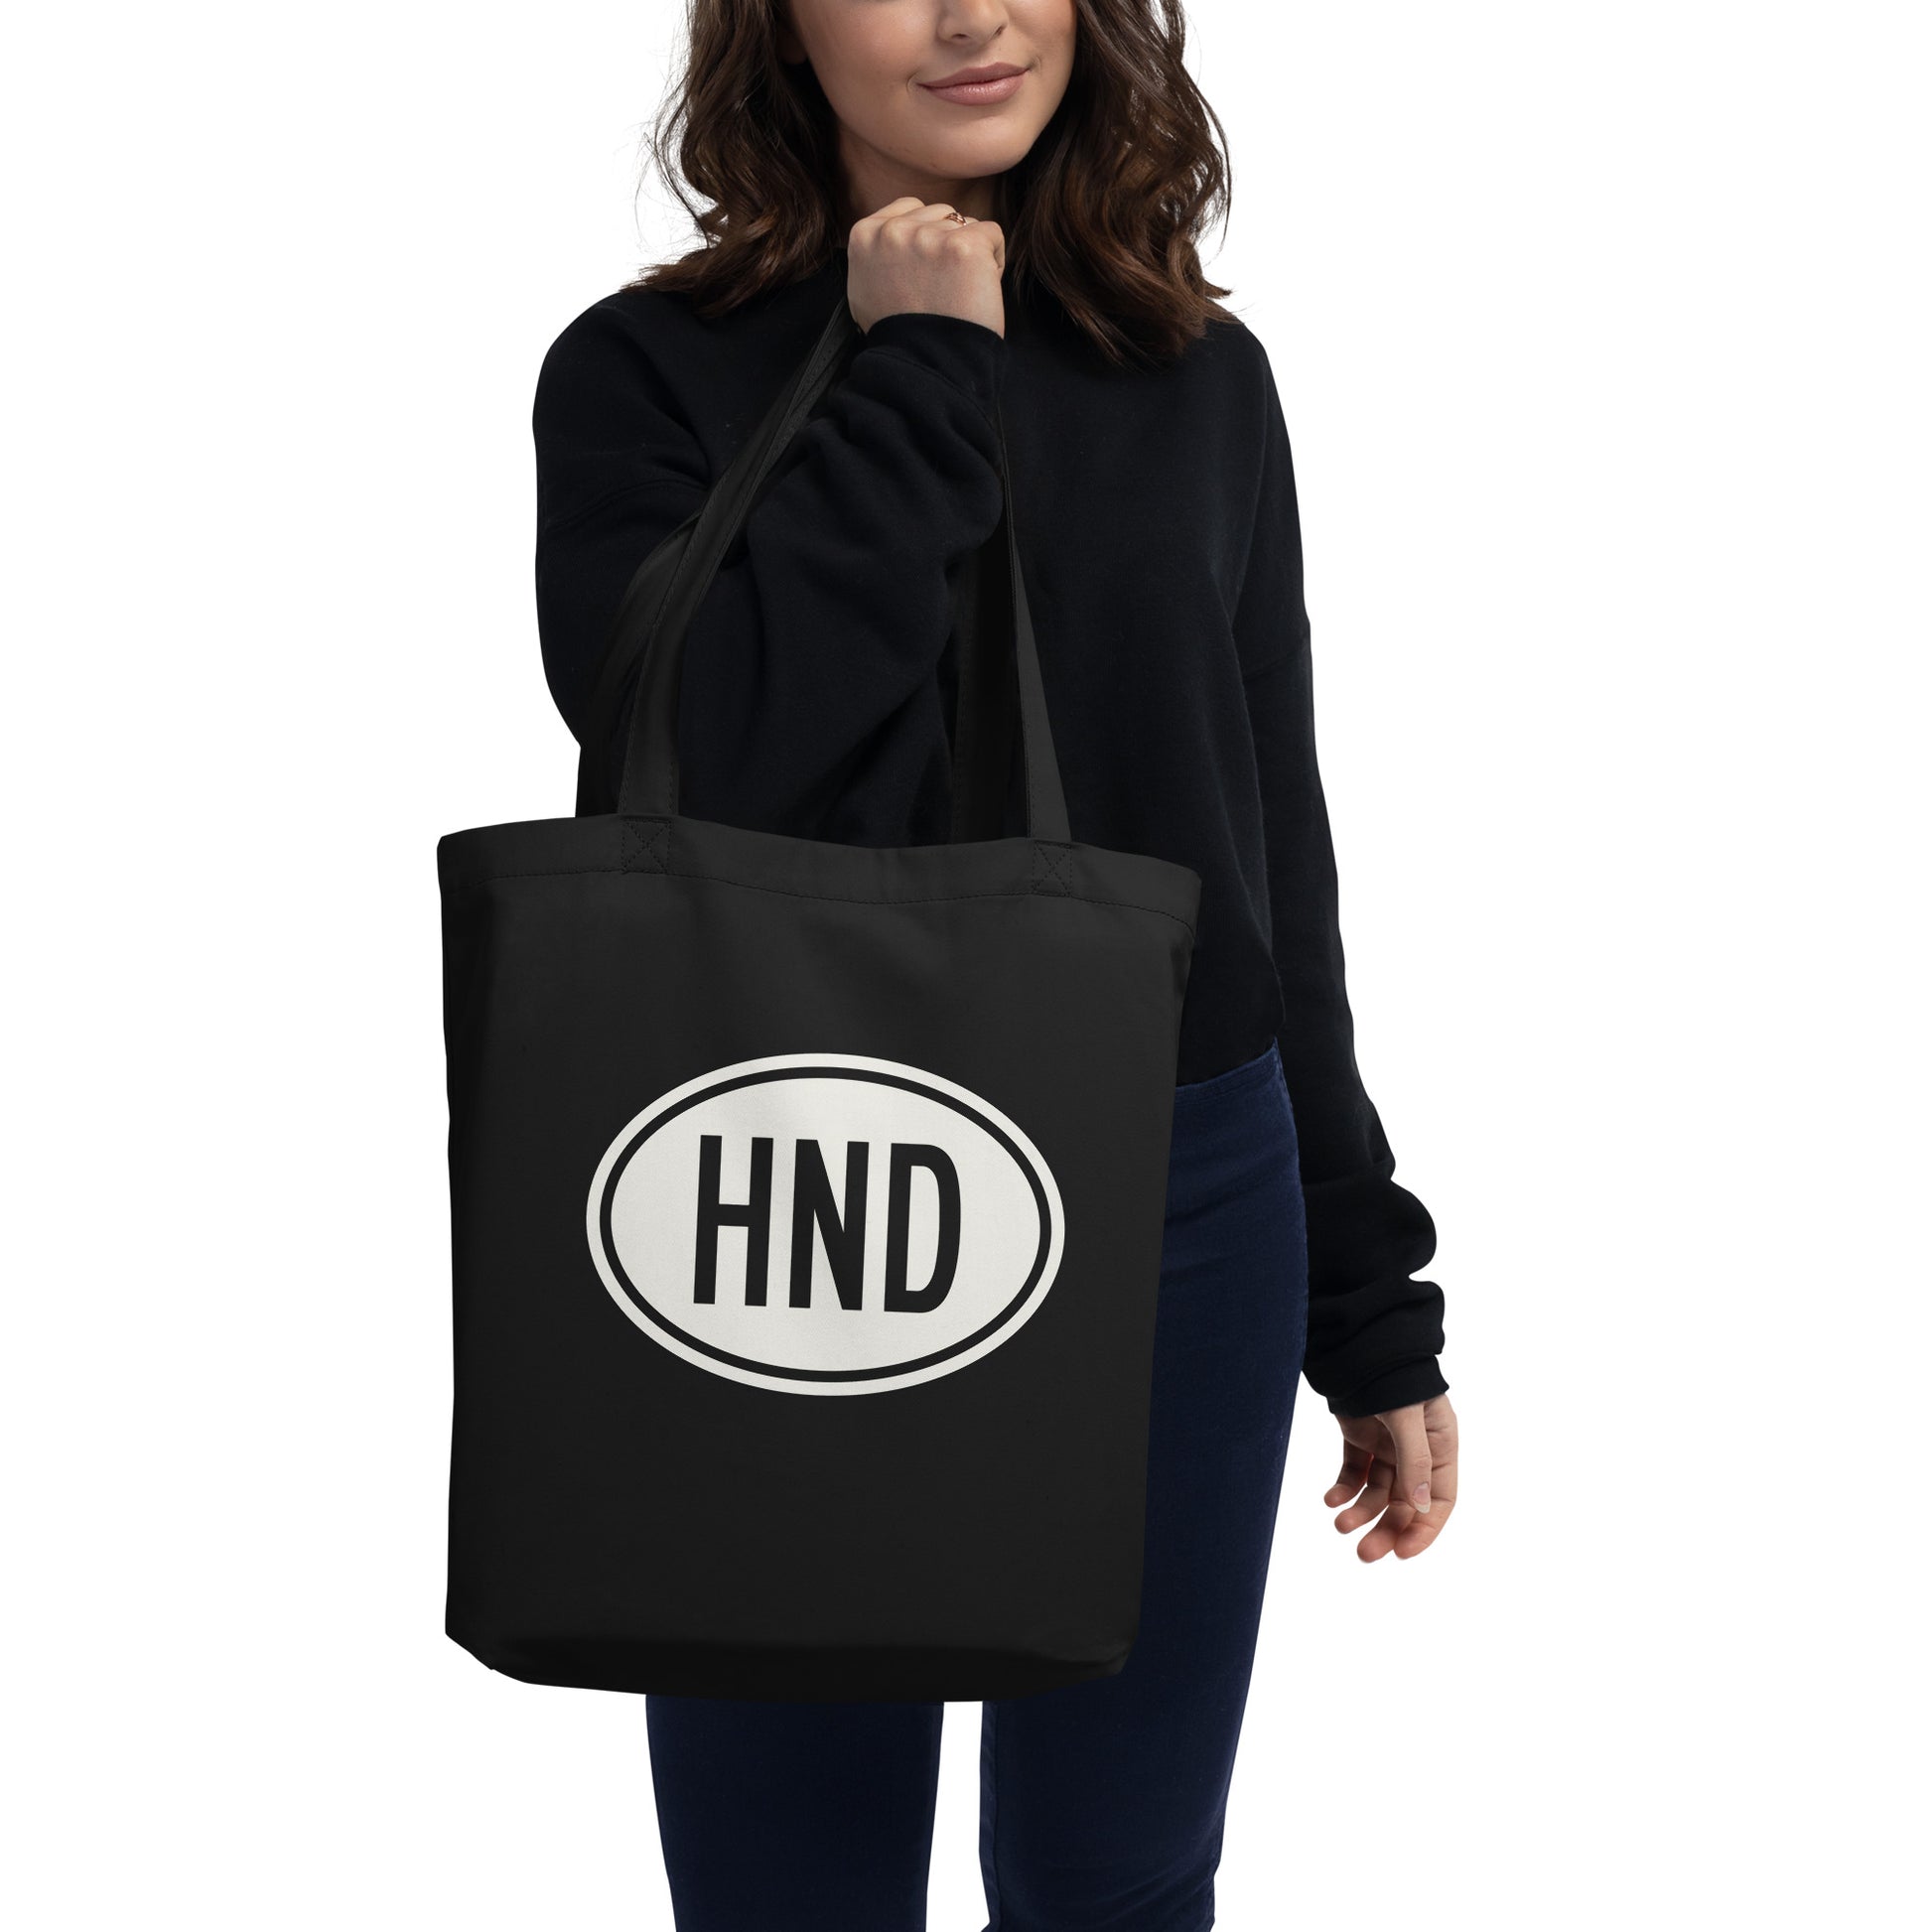 Unique Travel Gift Organic Tote - White Oval • HND Tokyo • YHM Designs - Image 03